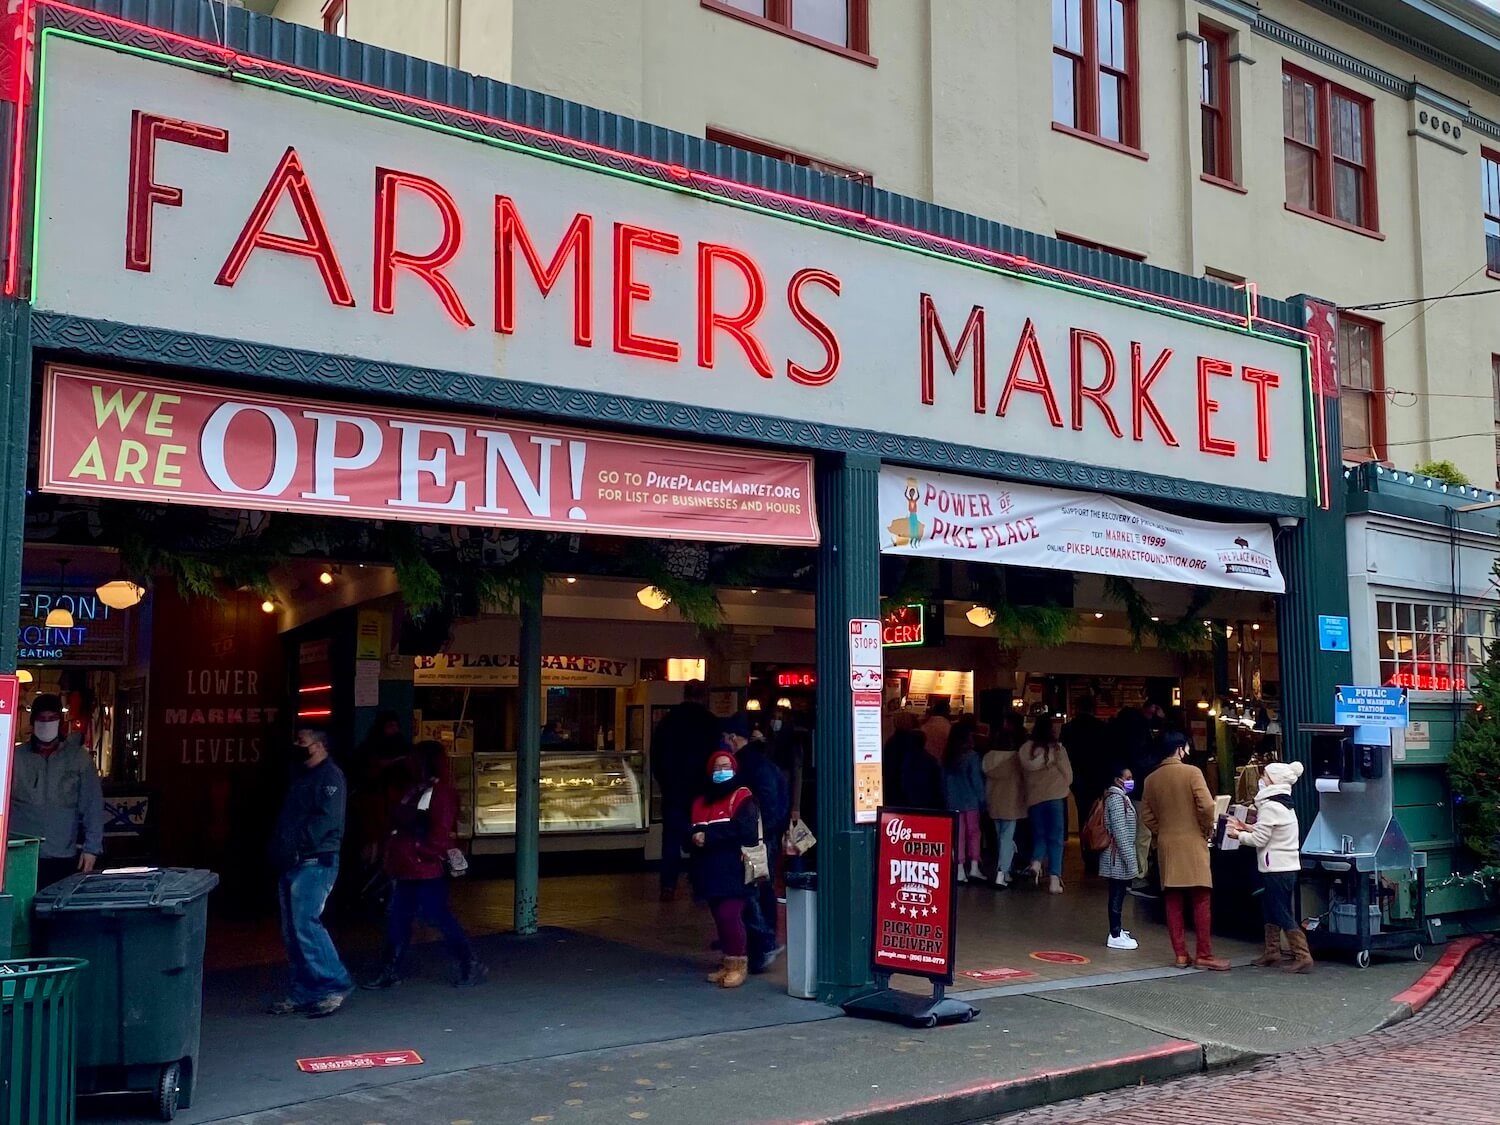 The entrance to Pike Place Market in Seattle has large neon red sign welcoming guests with brick street and cloudy sky.